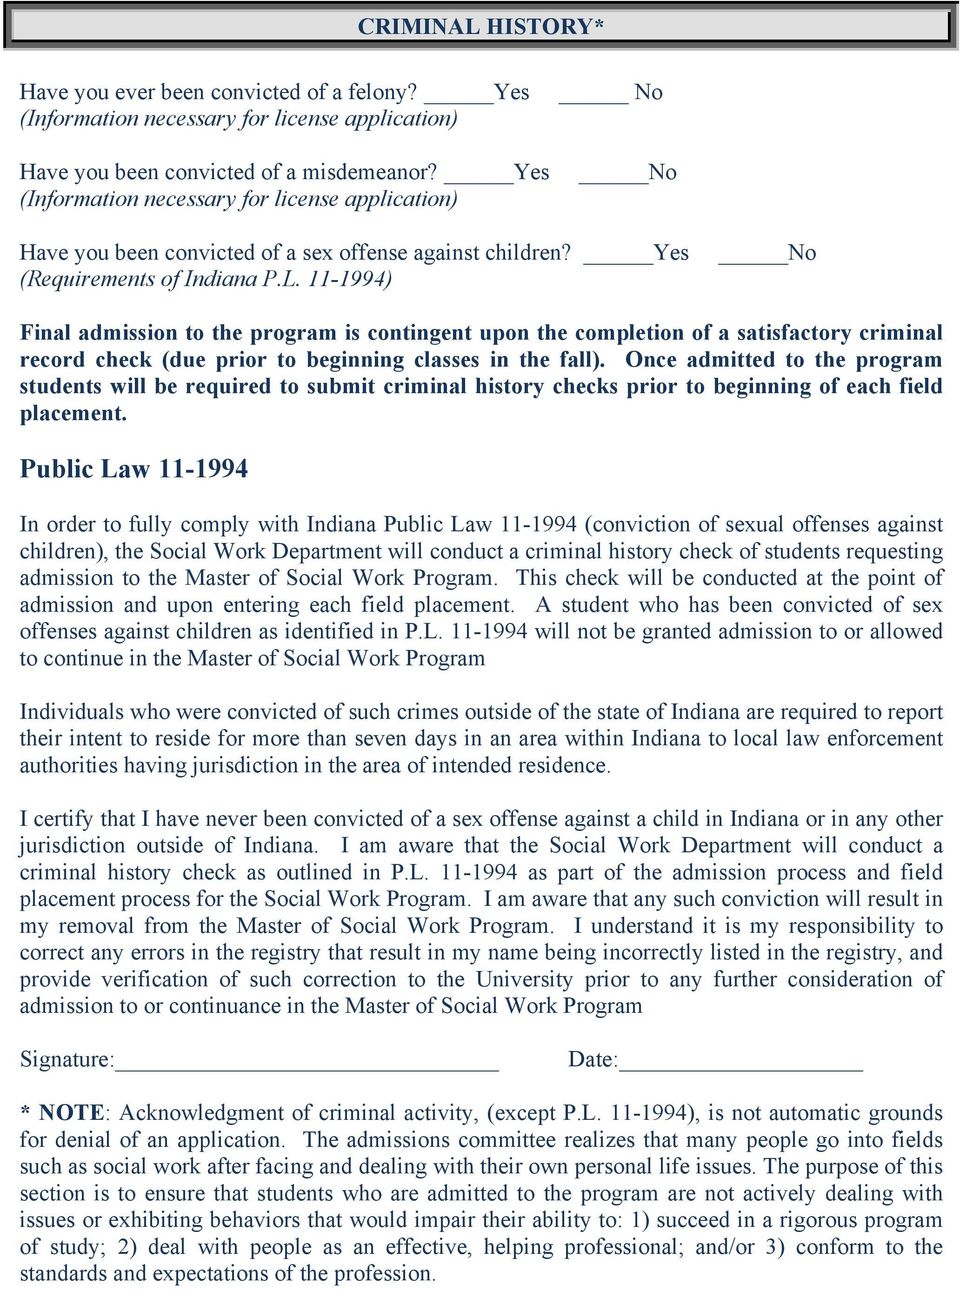 11-1994) No Final admission to the program is contingent upon the completion of a satisfactory criminal record check (due prior to beginning classes in the fall).